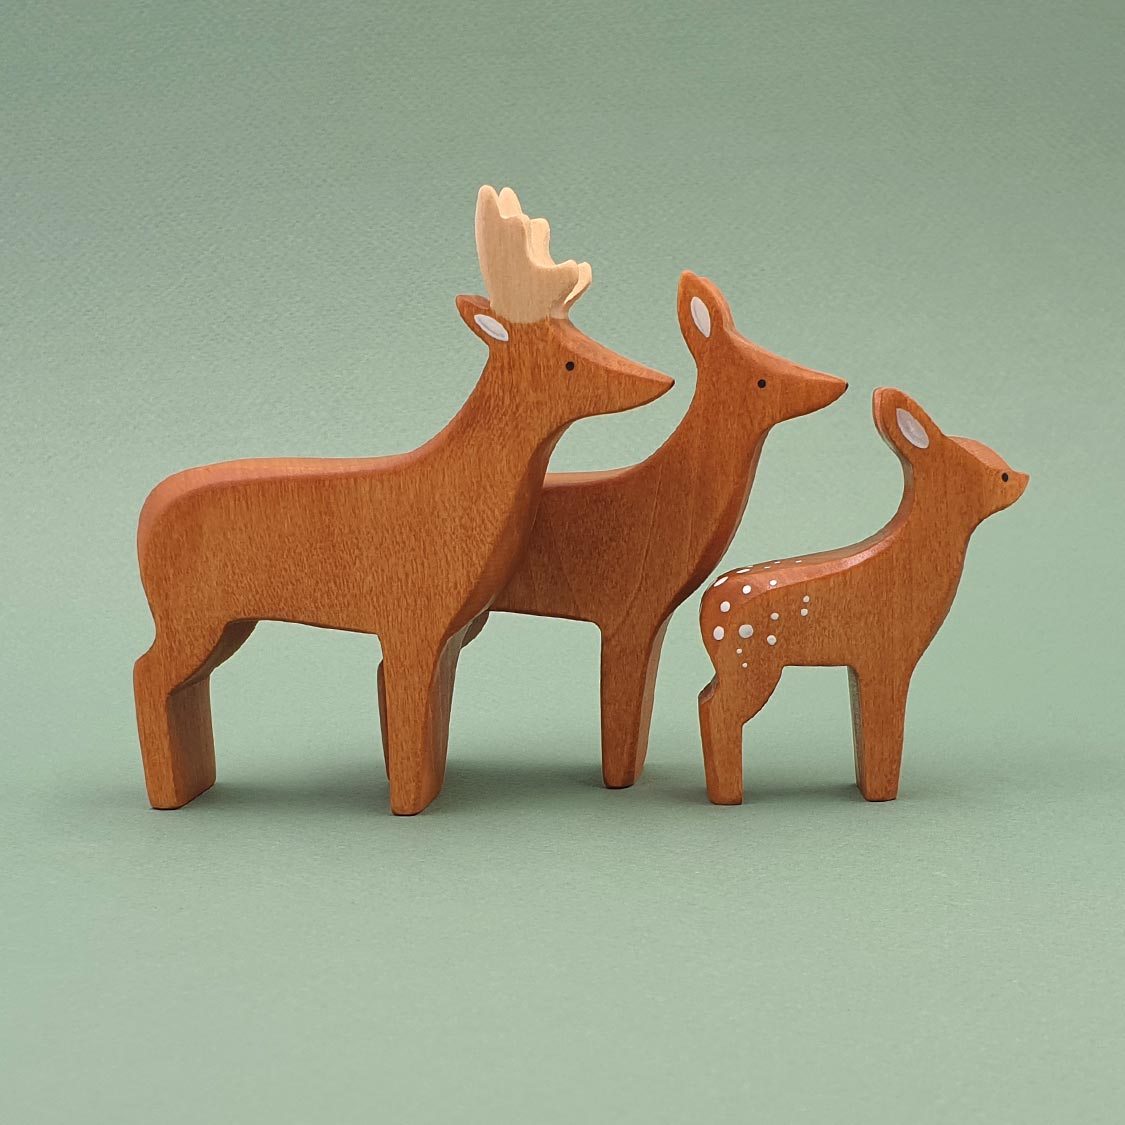 Brin d'Ours Handmade Wooden Deer - Wood Wood Toys Canada's Favourite Montessori Toy Store